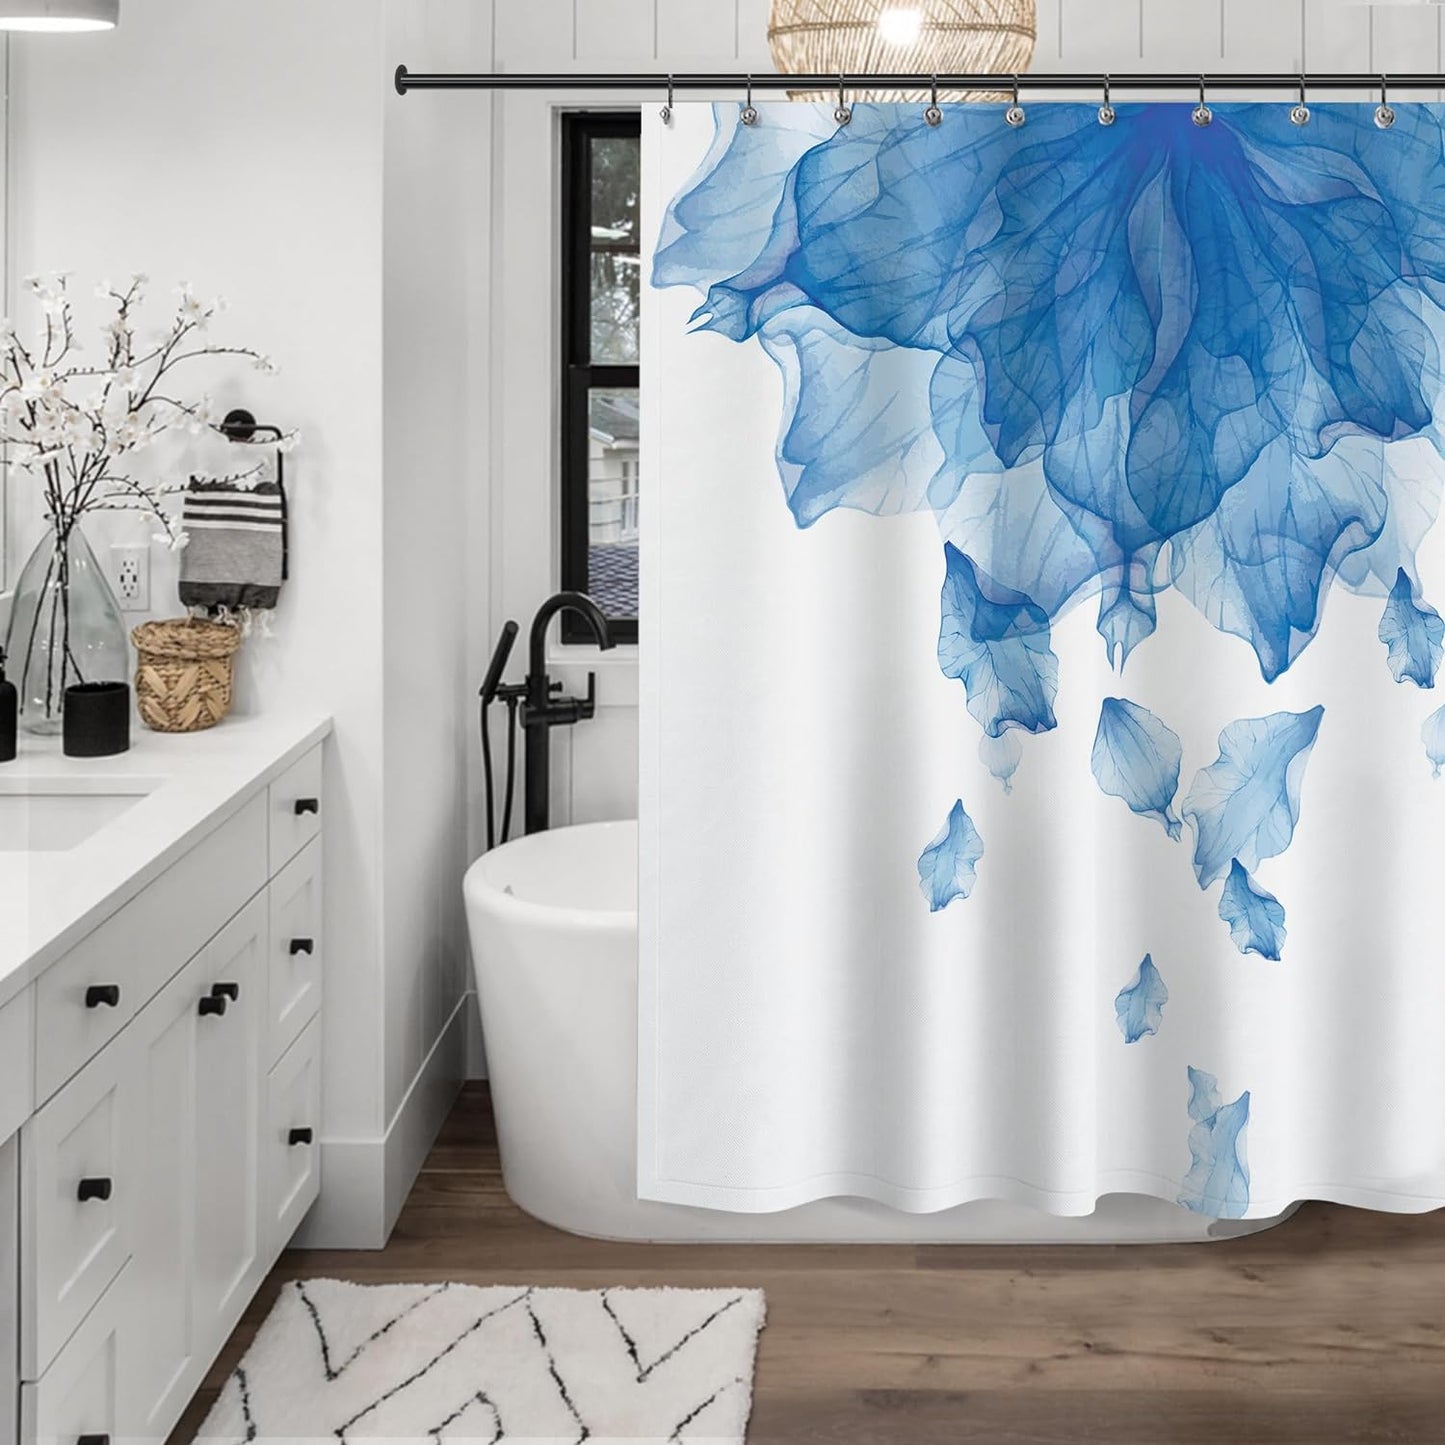 Floral Fabric Shower Curtain, Teal Blue Watercolor Shower Curtain for Bathroom Modern Decor Tapestry